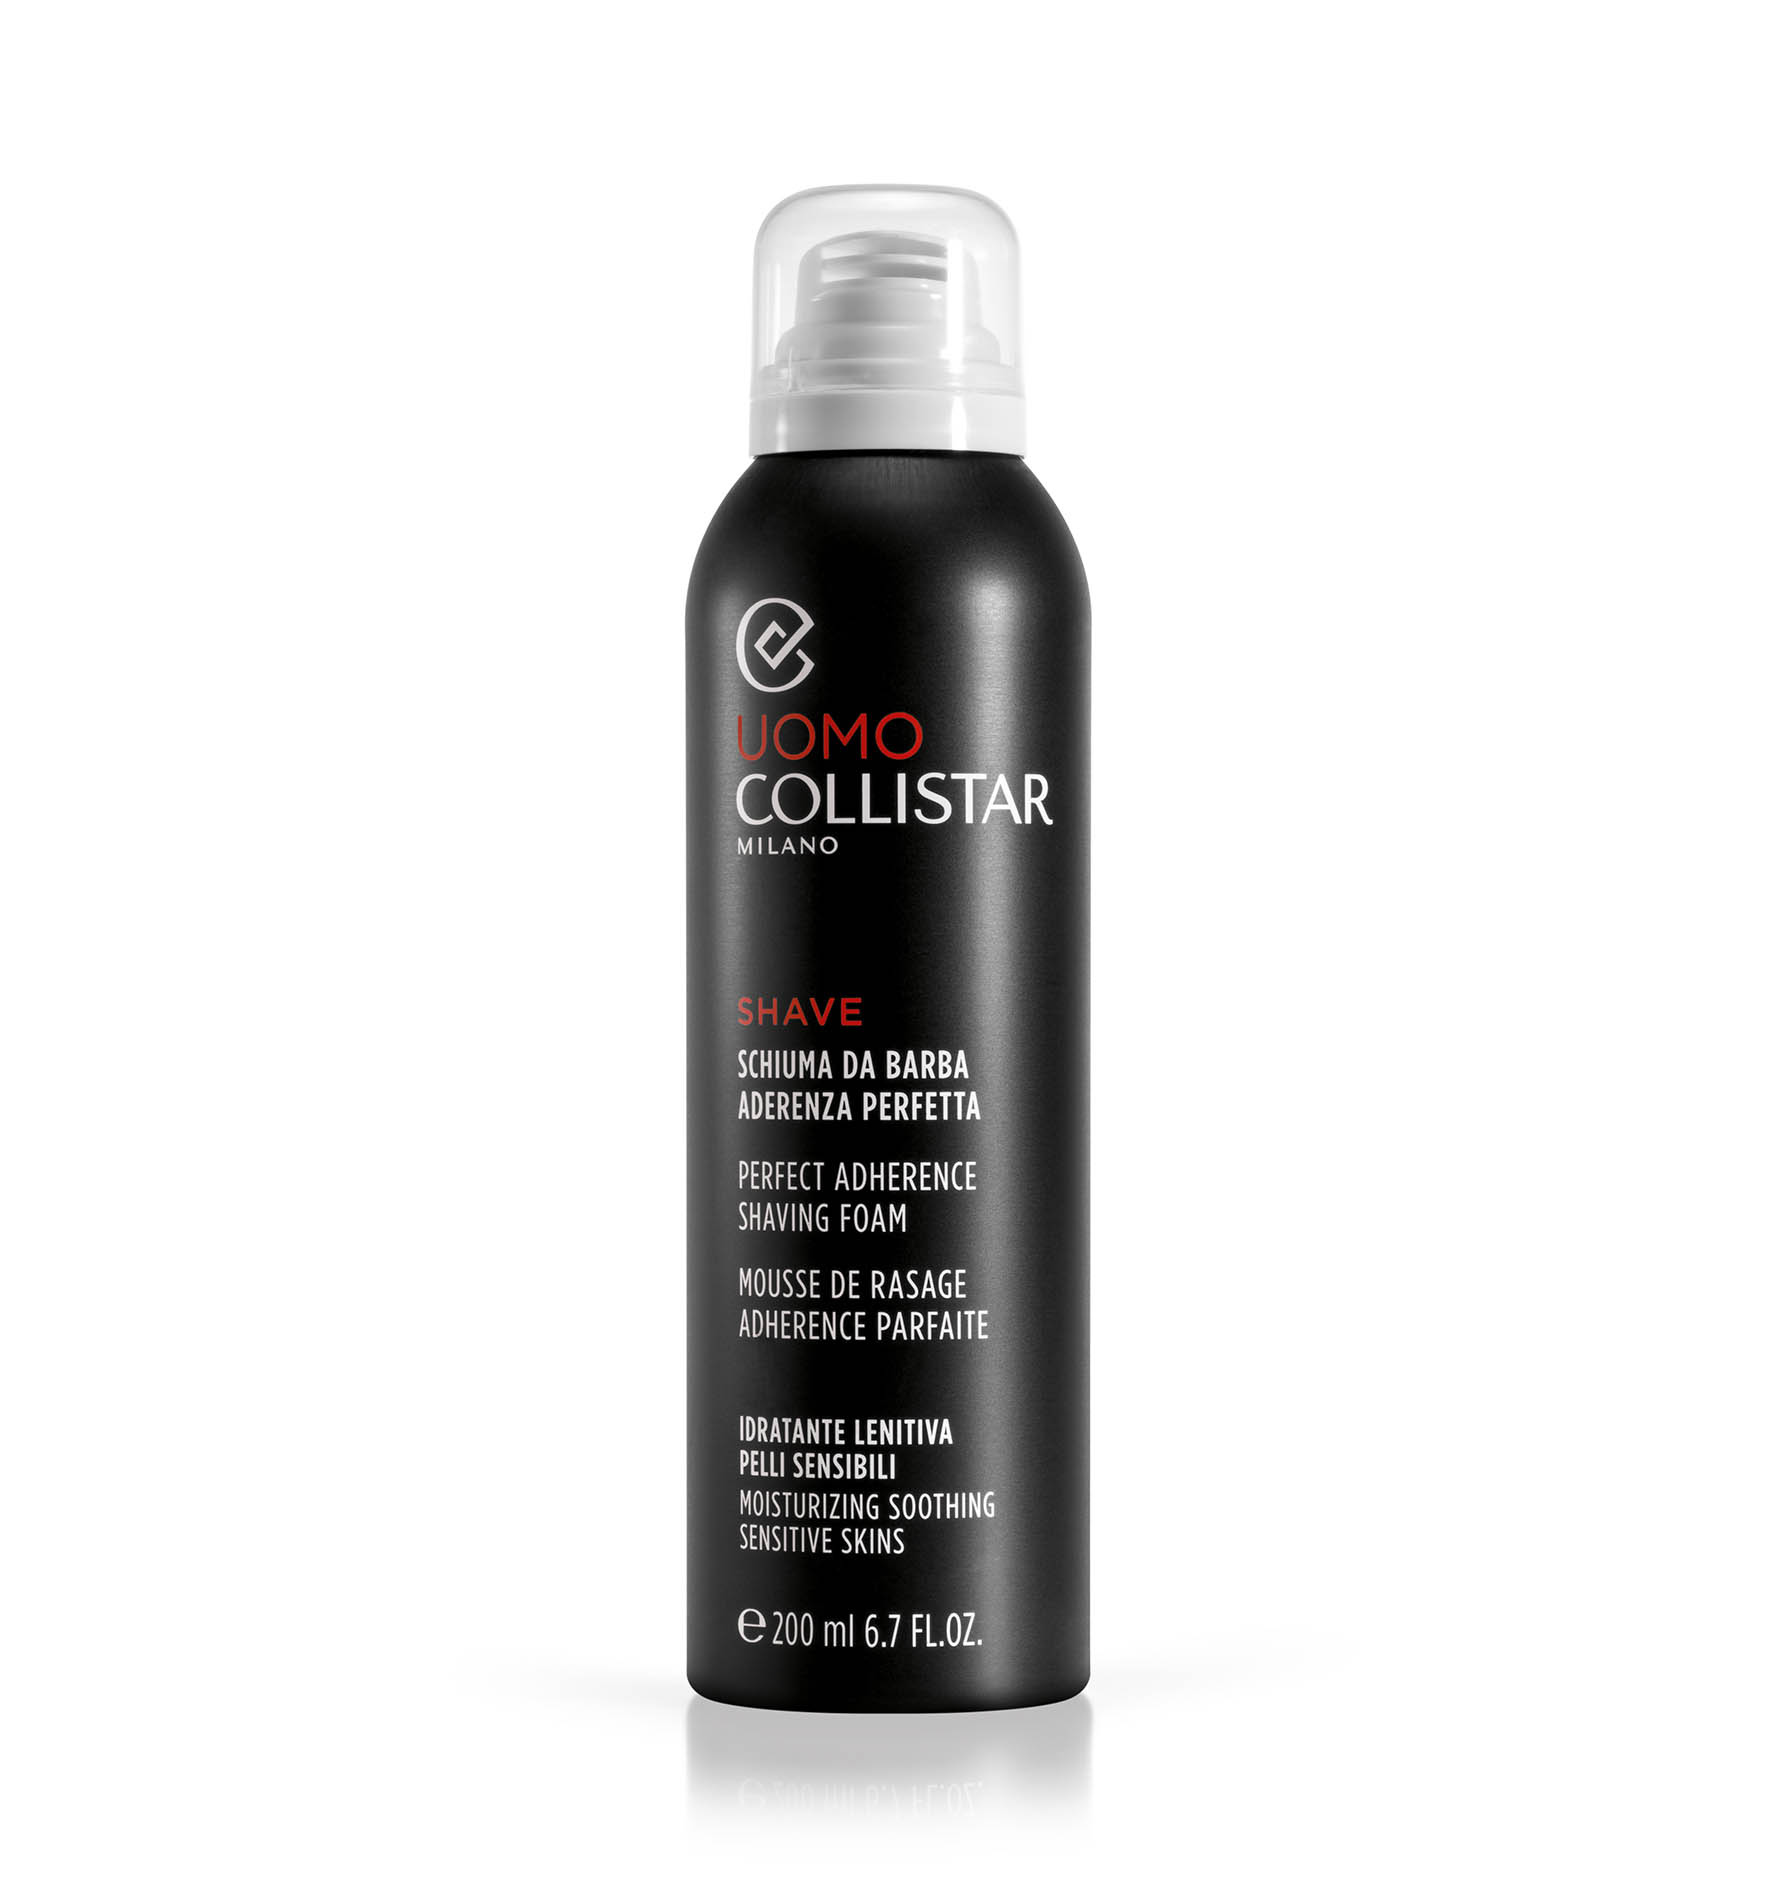 PERFECT ADHERENCE SHAVING FOAM - GIFT IDEAS | Collistar - Shop Online Ufficiale